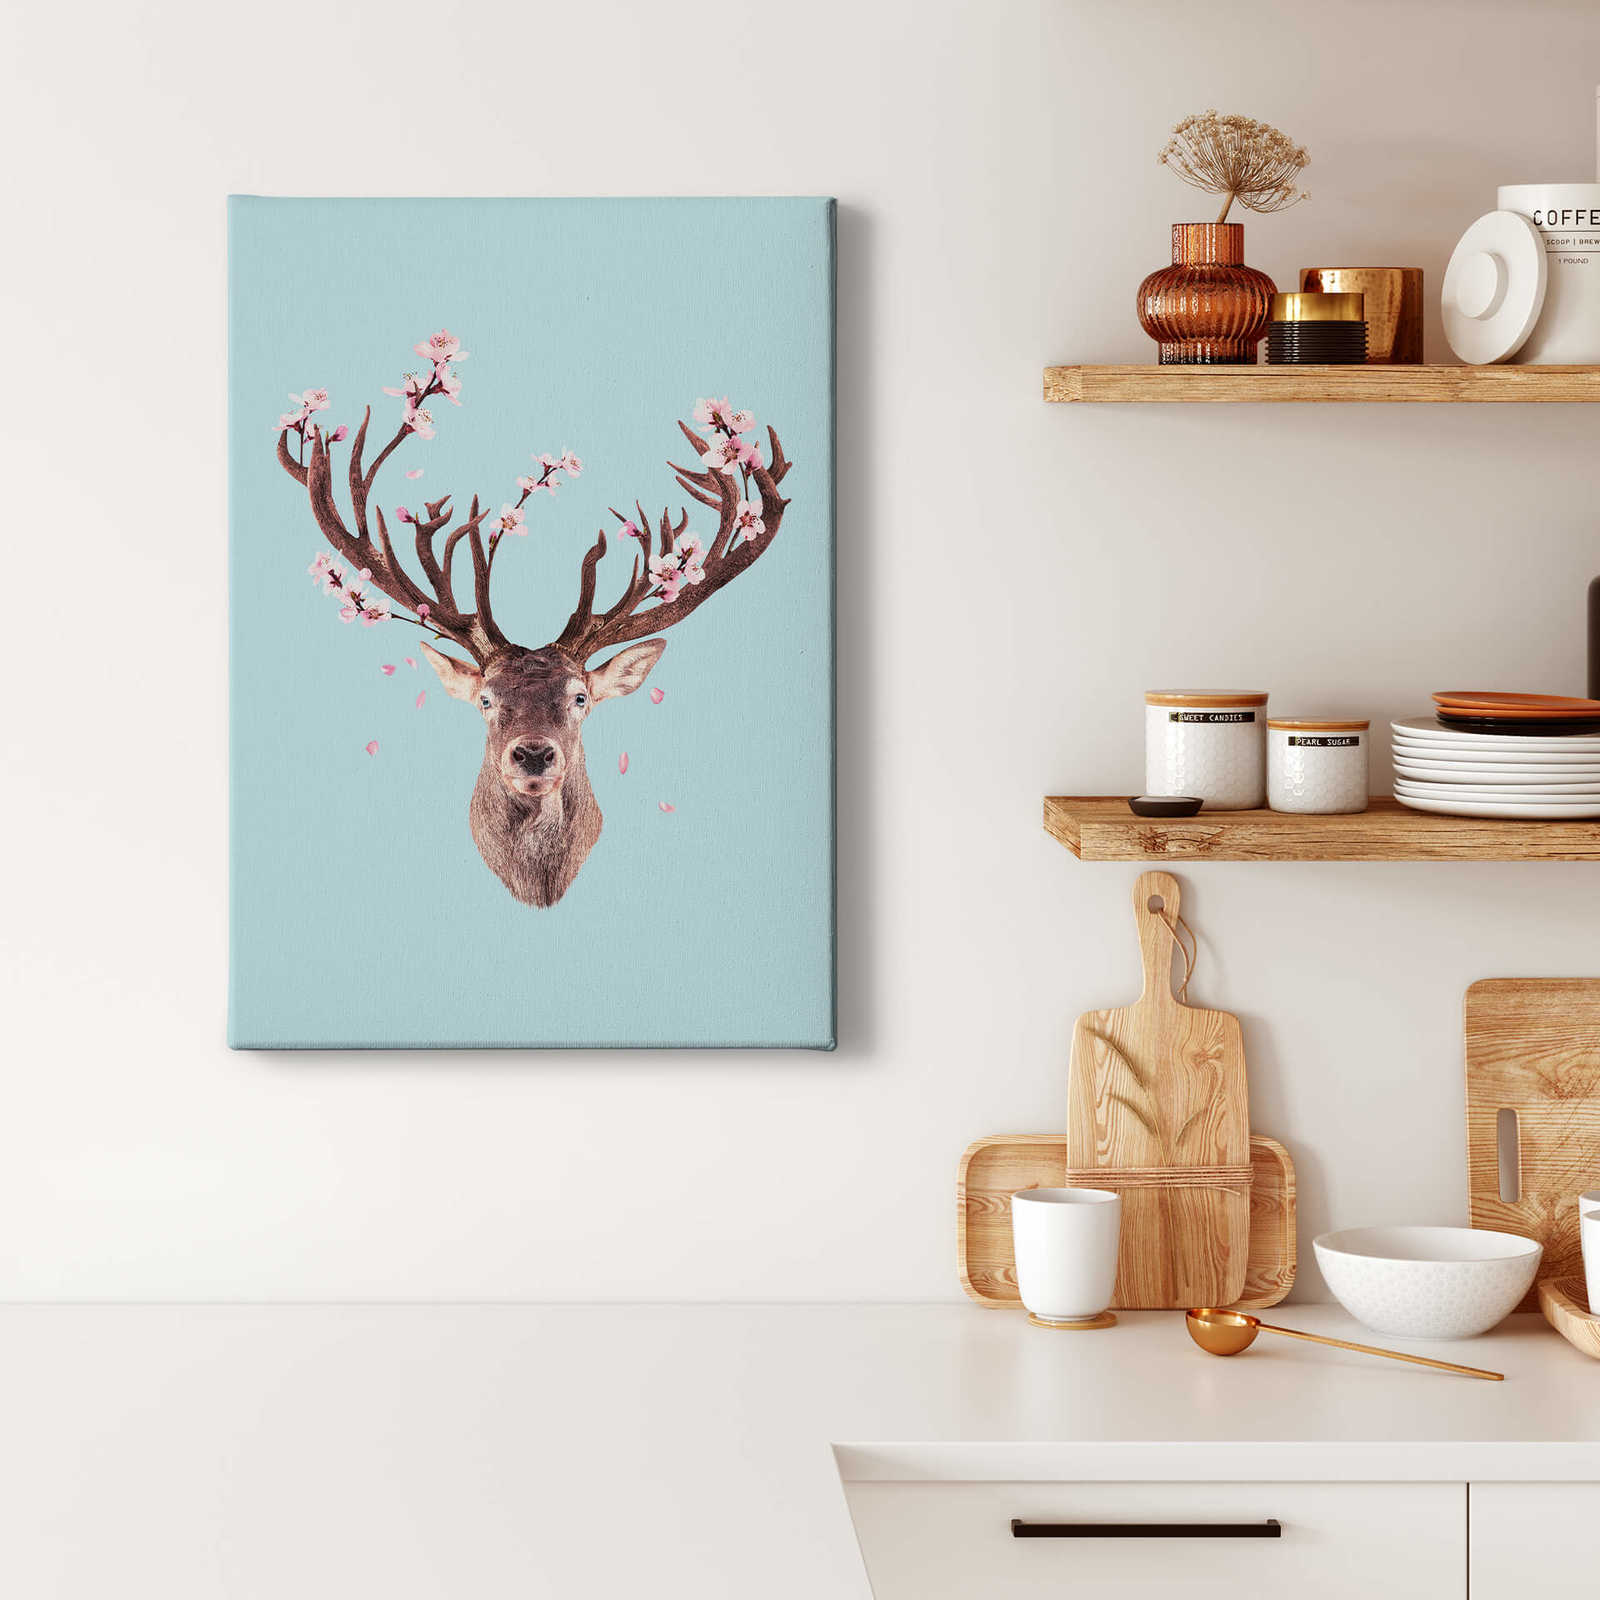             Loose Canvas print Deer with cherry blossoms – Colourful
        